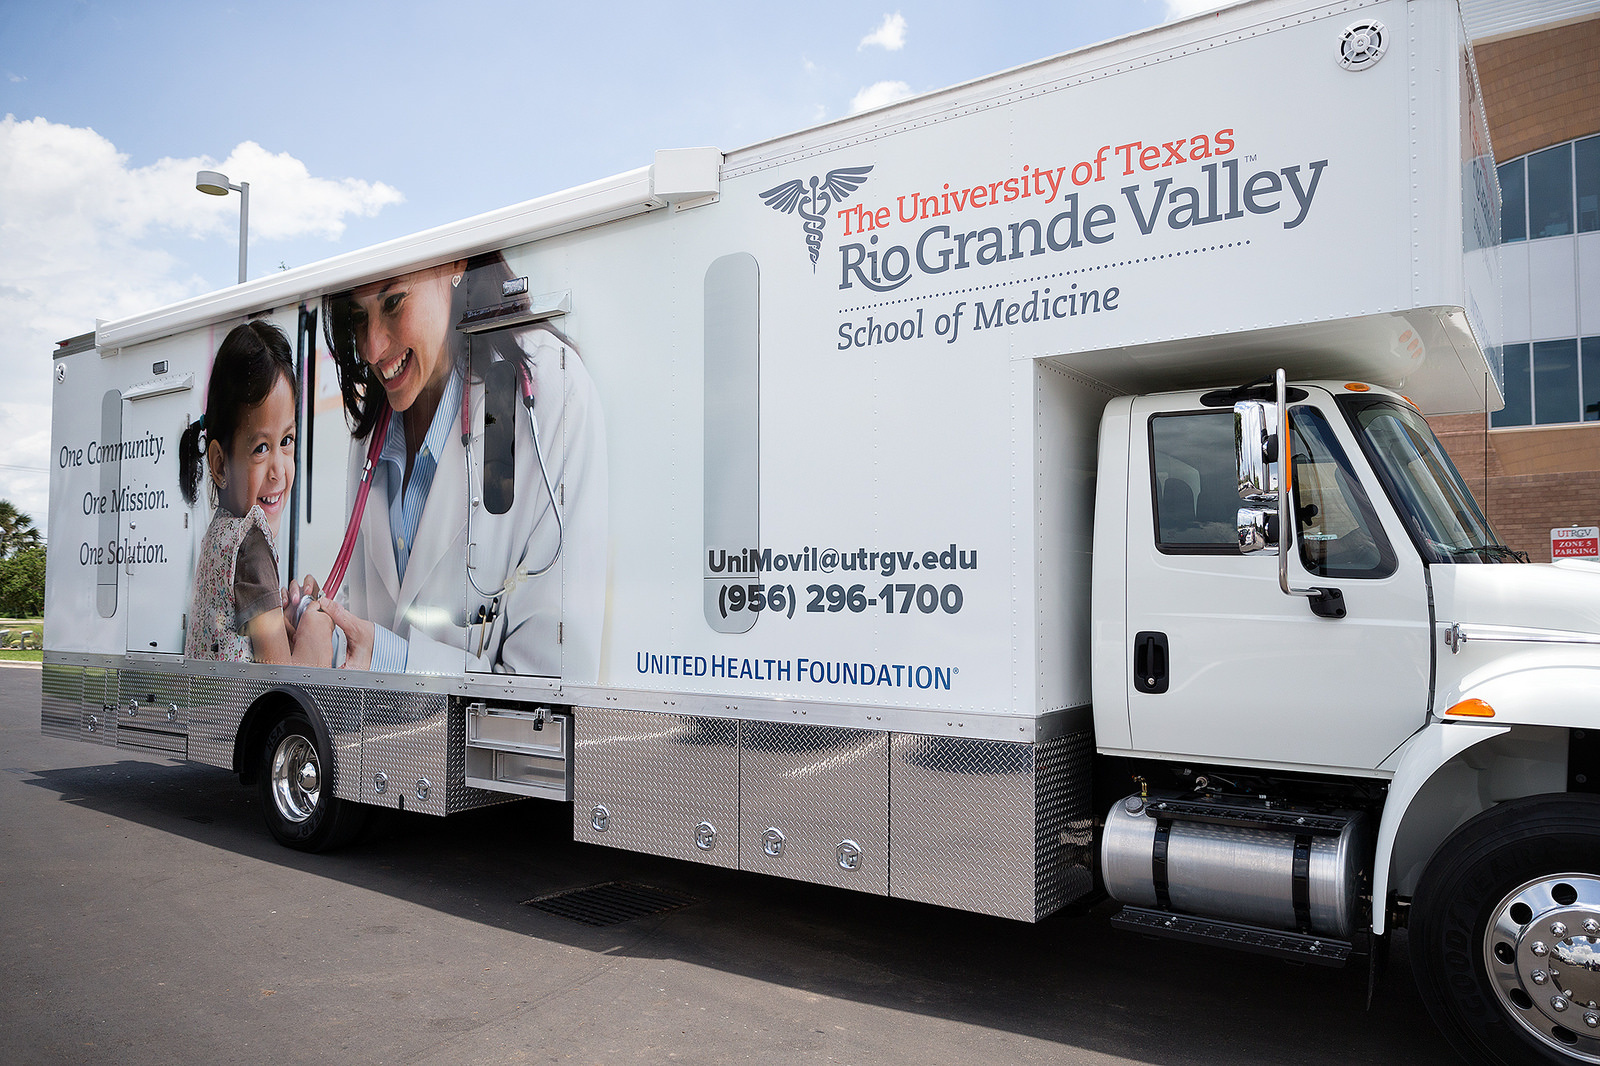 Utrgv And United Health Foundation Unveil Mobile Clinic To Deliver Health Care To Rio Grande Valley Communities Business Wire